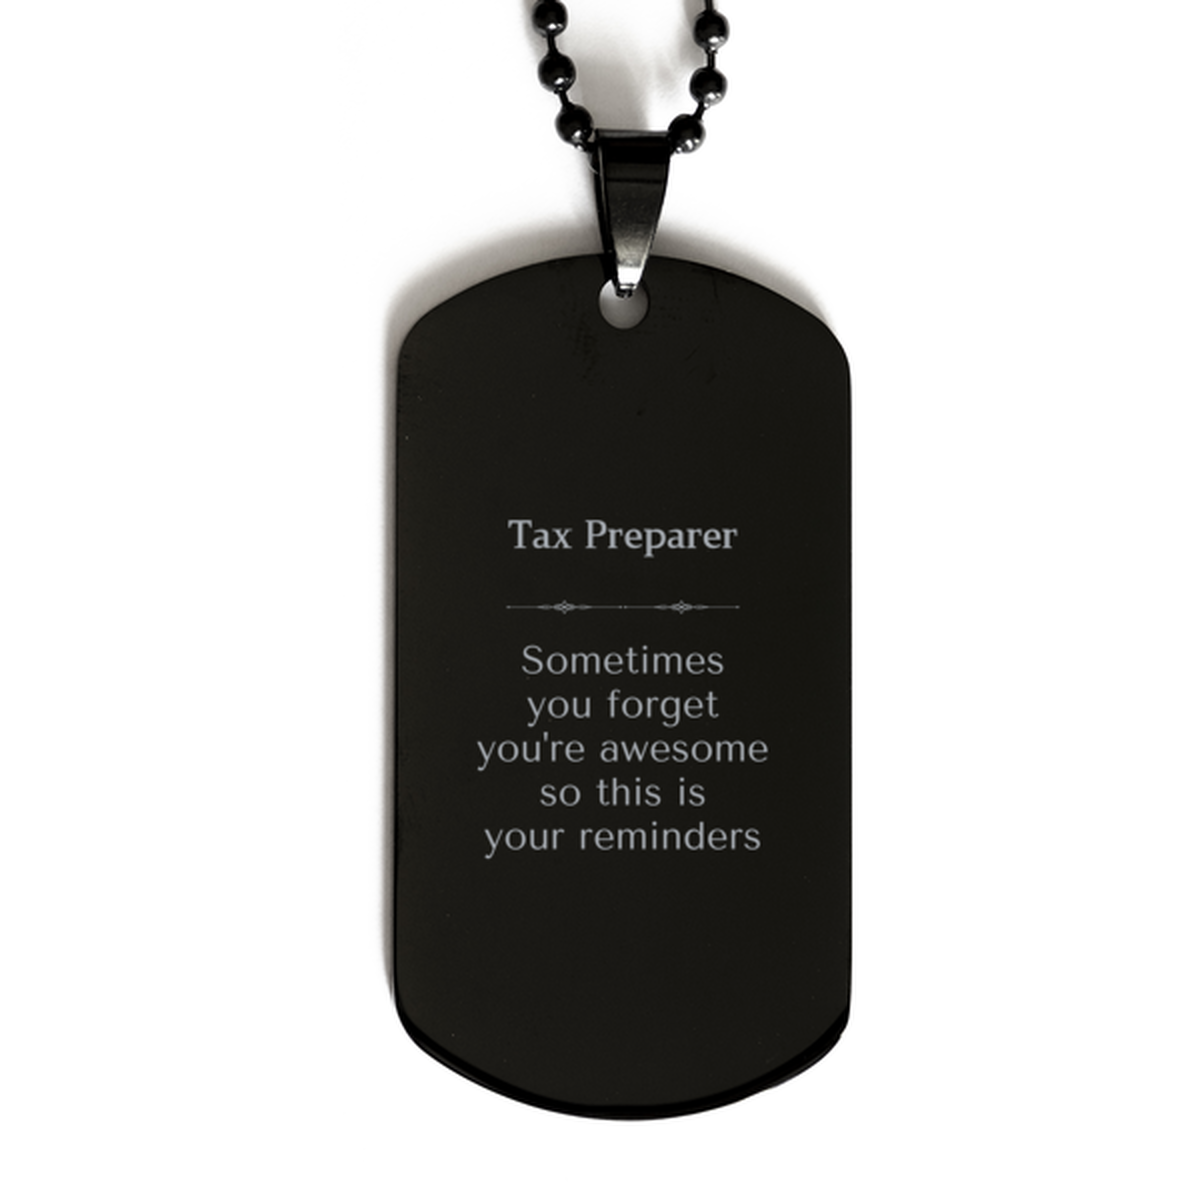 Sentimental Tax Preparer Black Dog Tag, Tax Preparer Sometimes you forget you're awesome so this is your reminders, Graduation Christmas Birthday Gifts for Tax Preparer, Men, Women, Coworkers